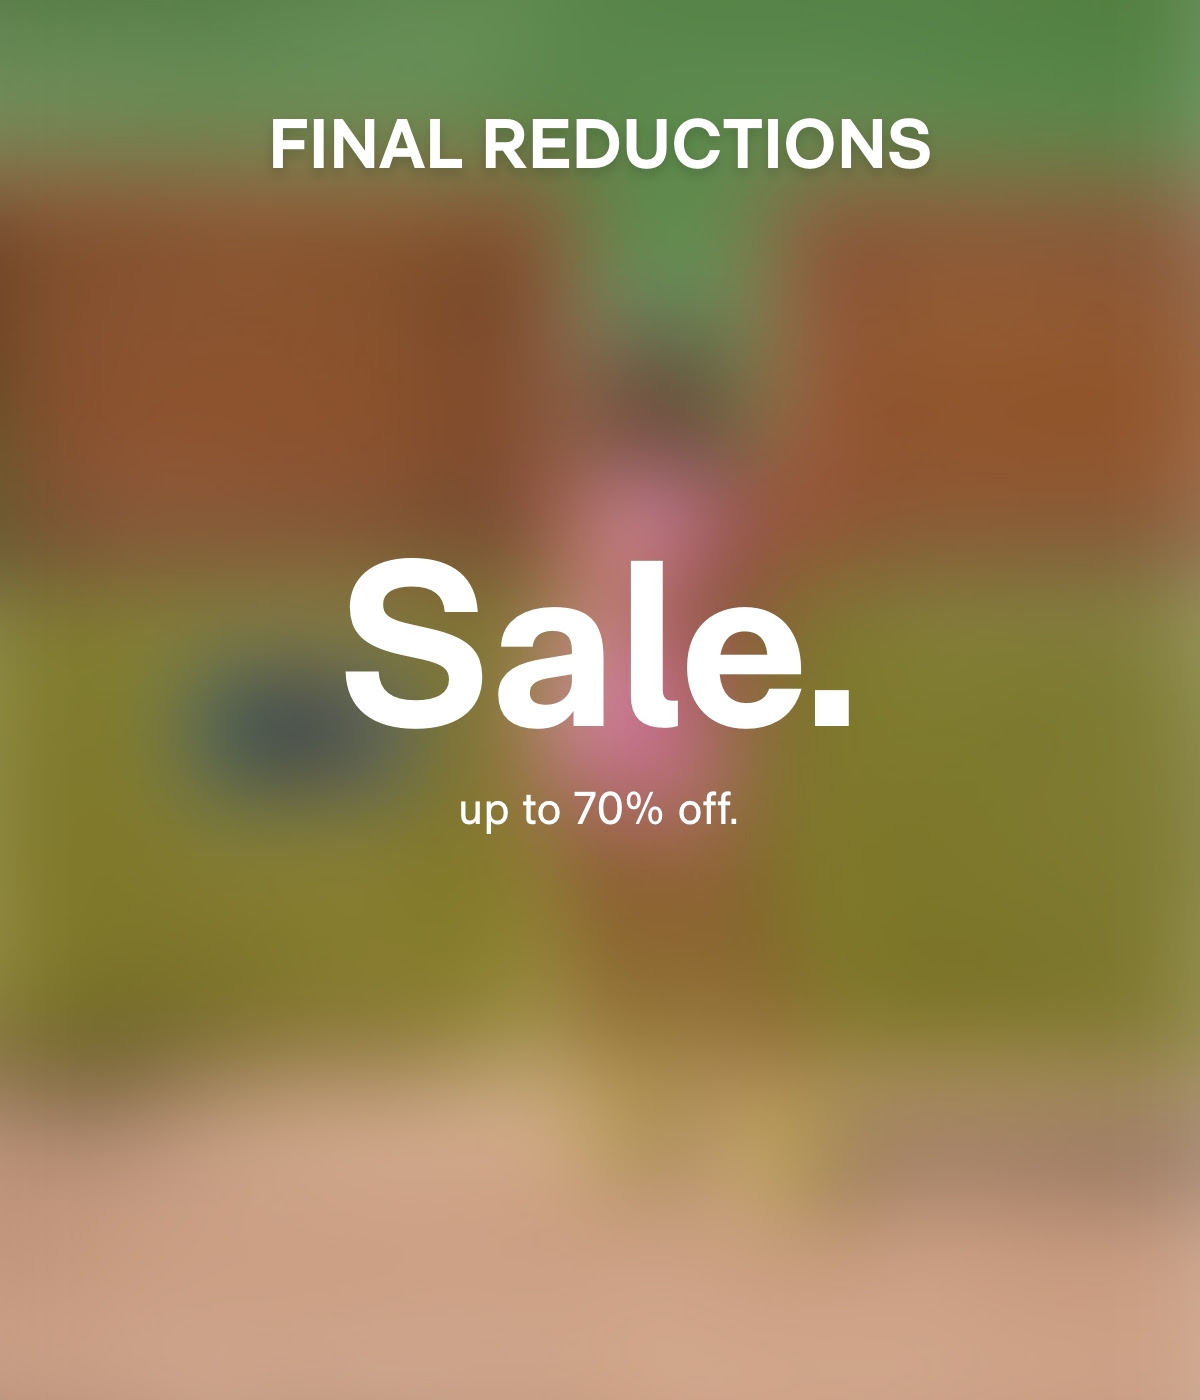 Sale up to 70% Further Reductions